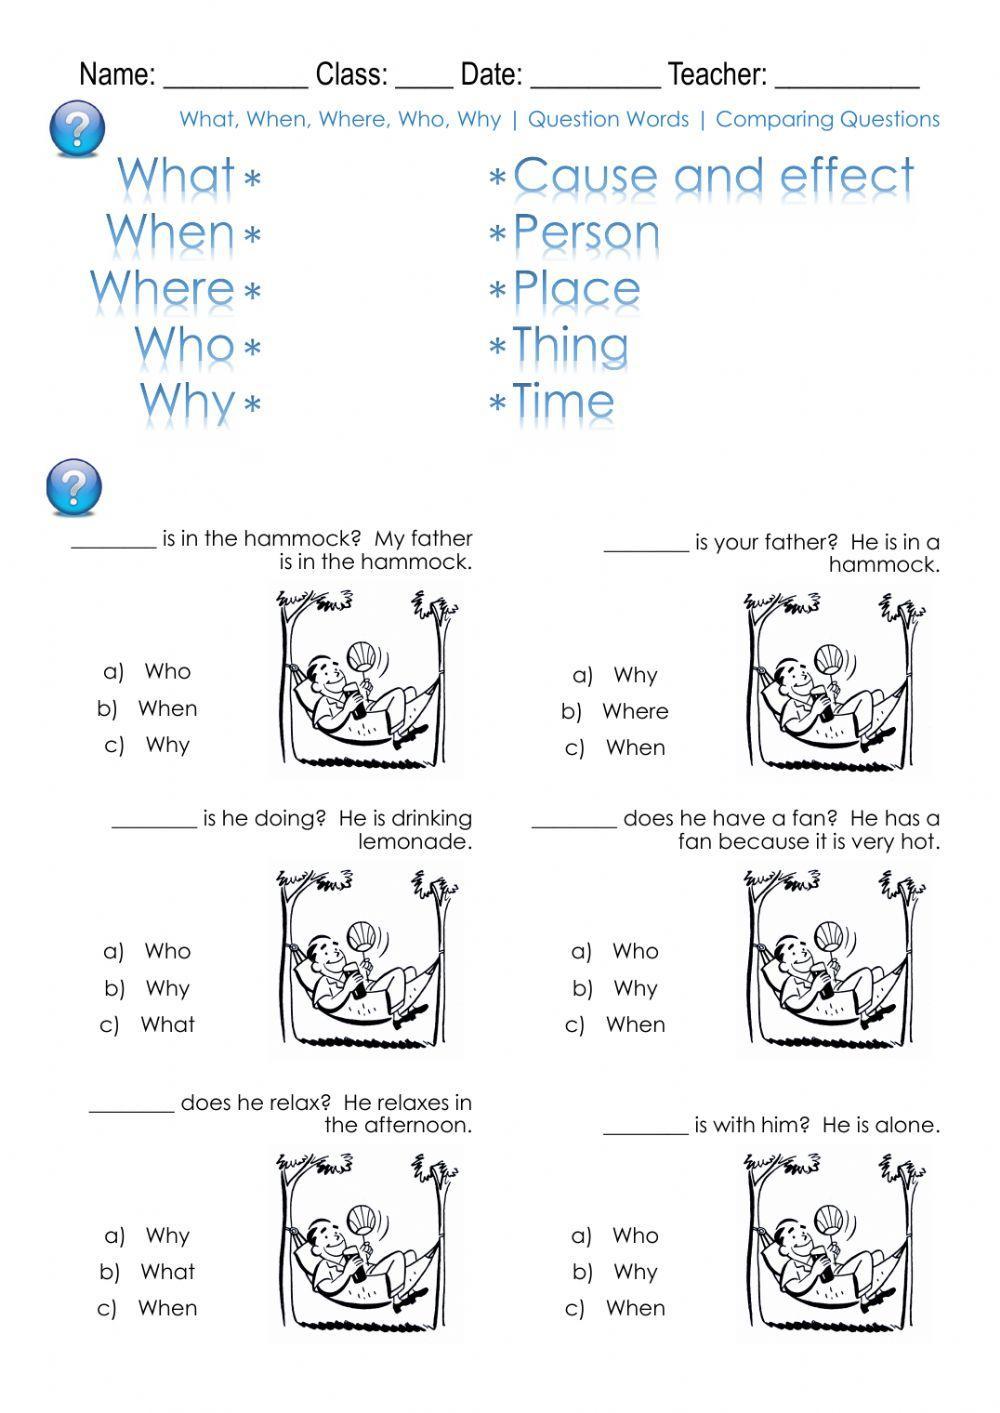 What, When, Where, Who, Why - Question Words - Comparing Questions